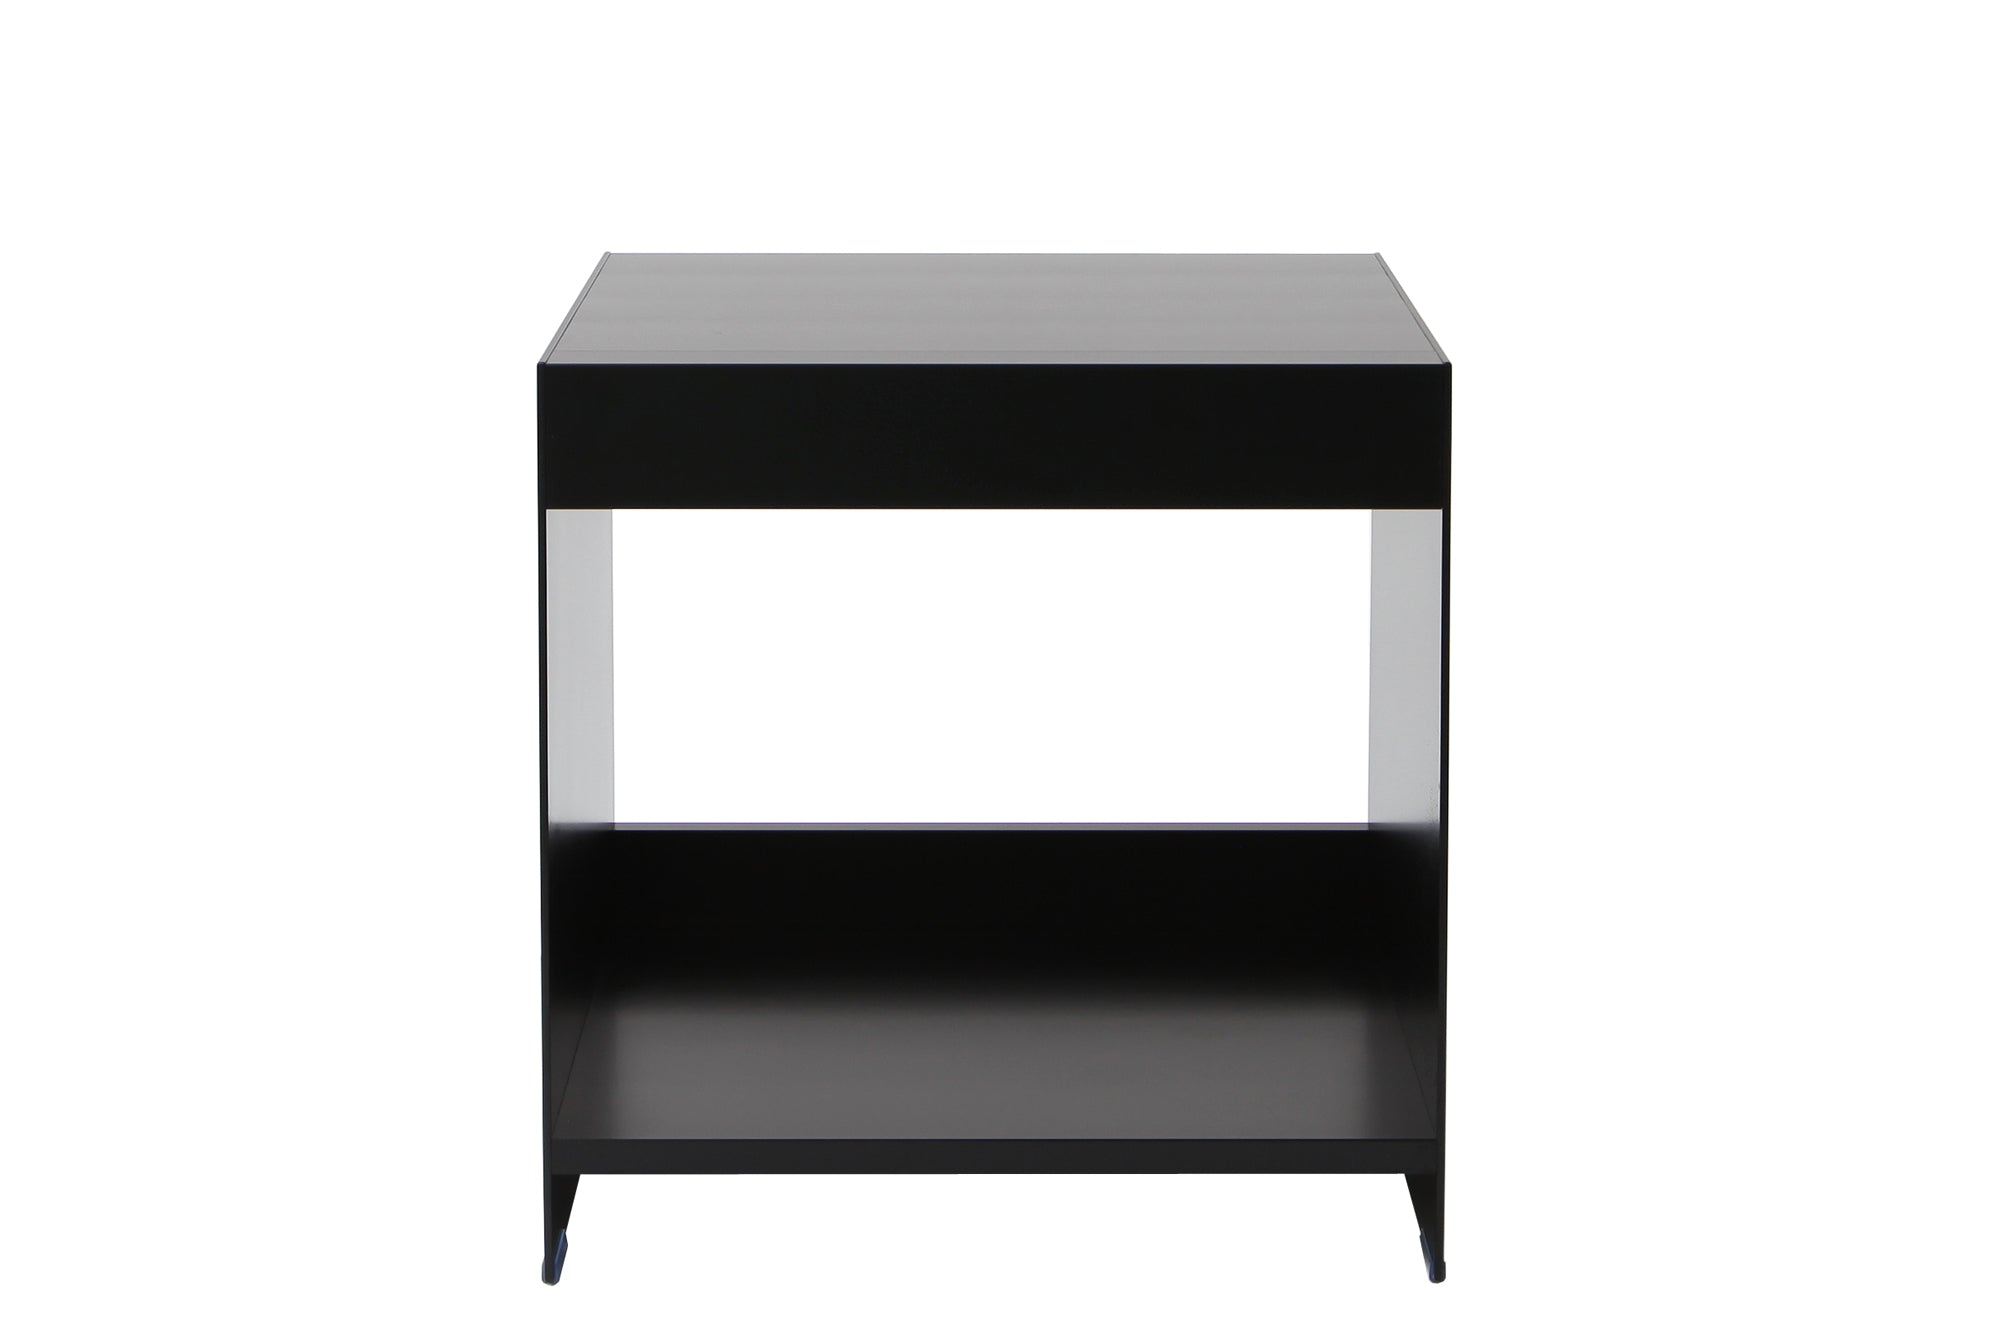 H1 aluminium side table in black by ON&ON